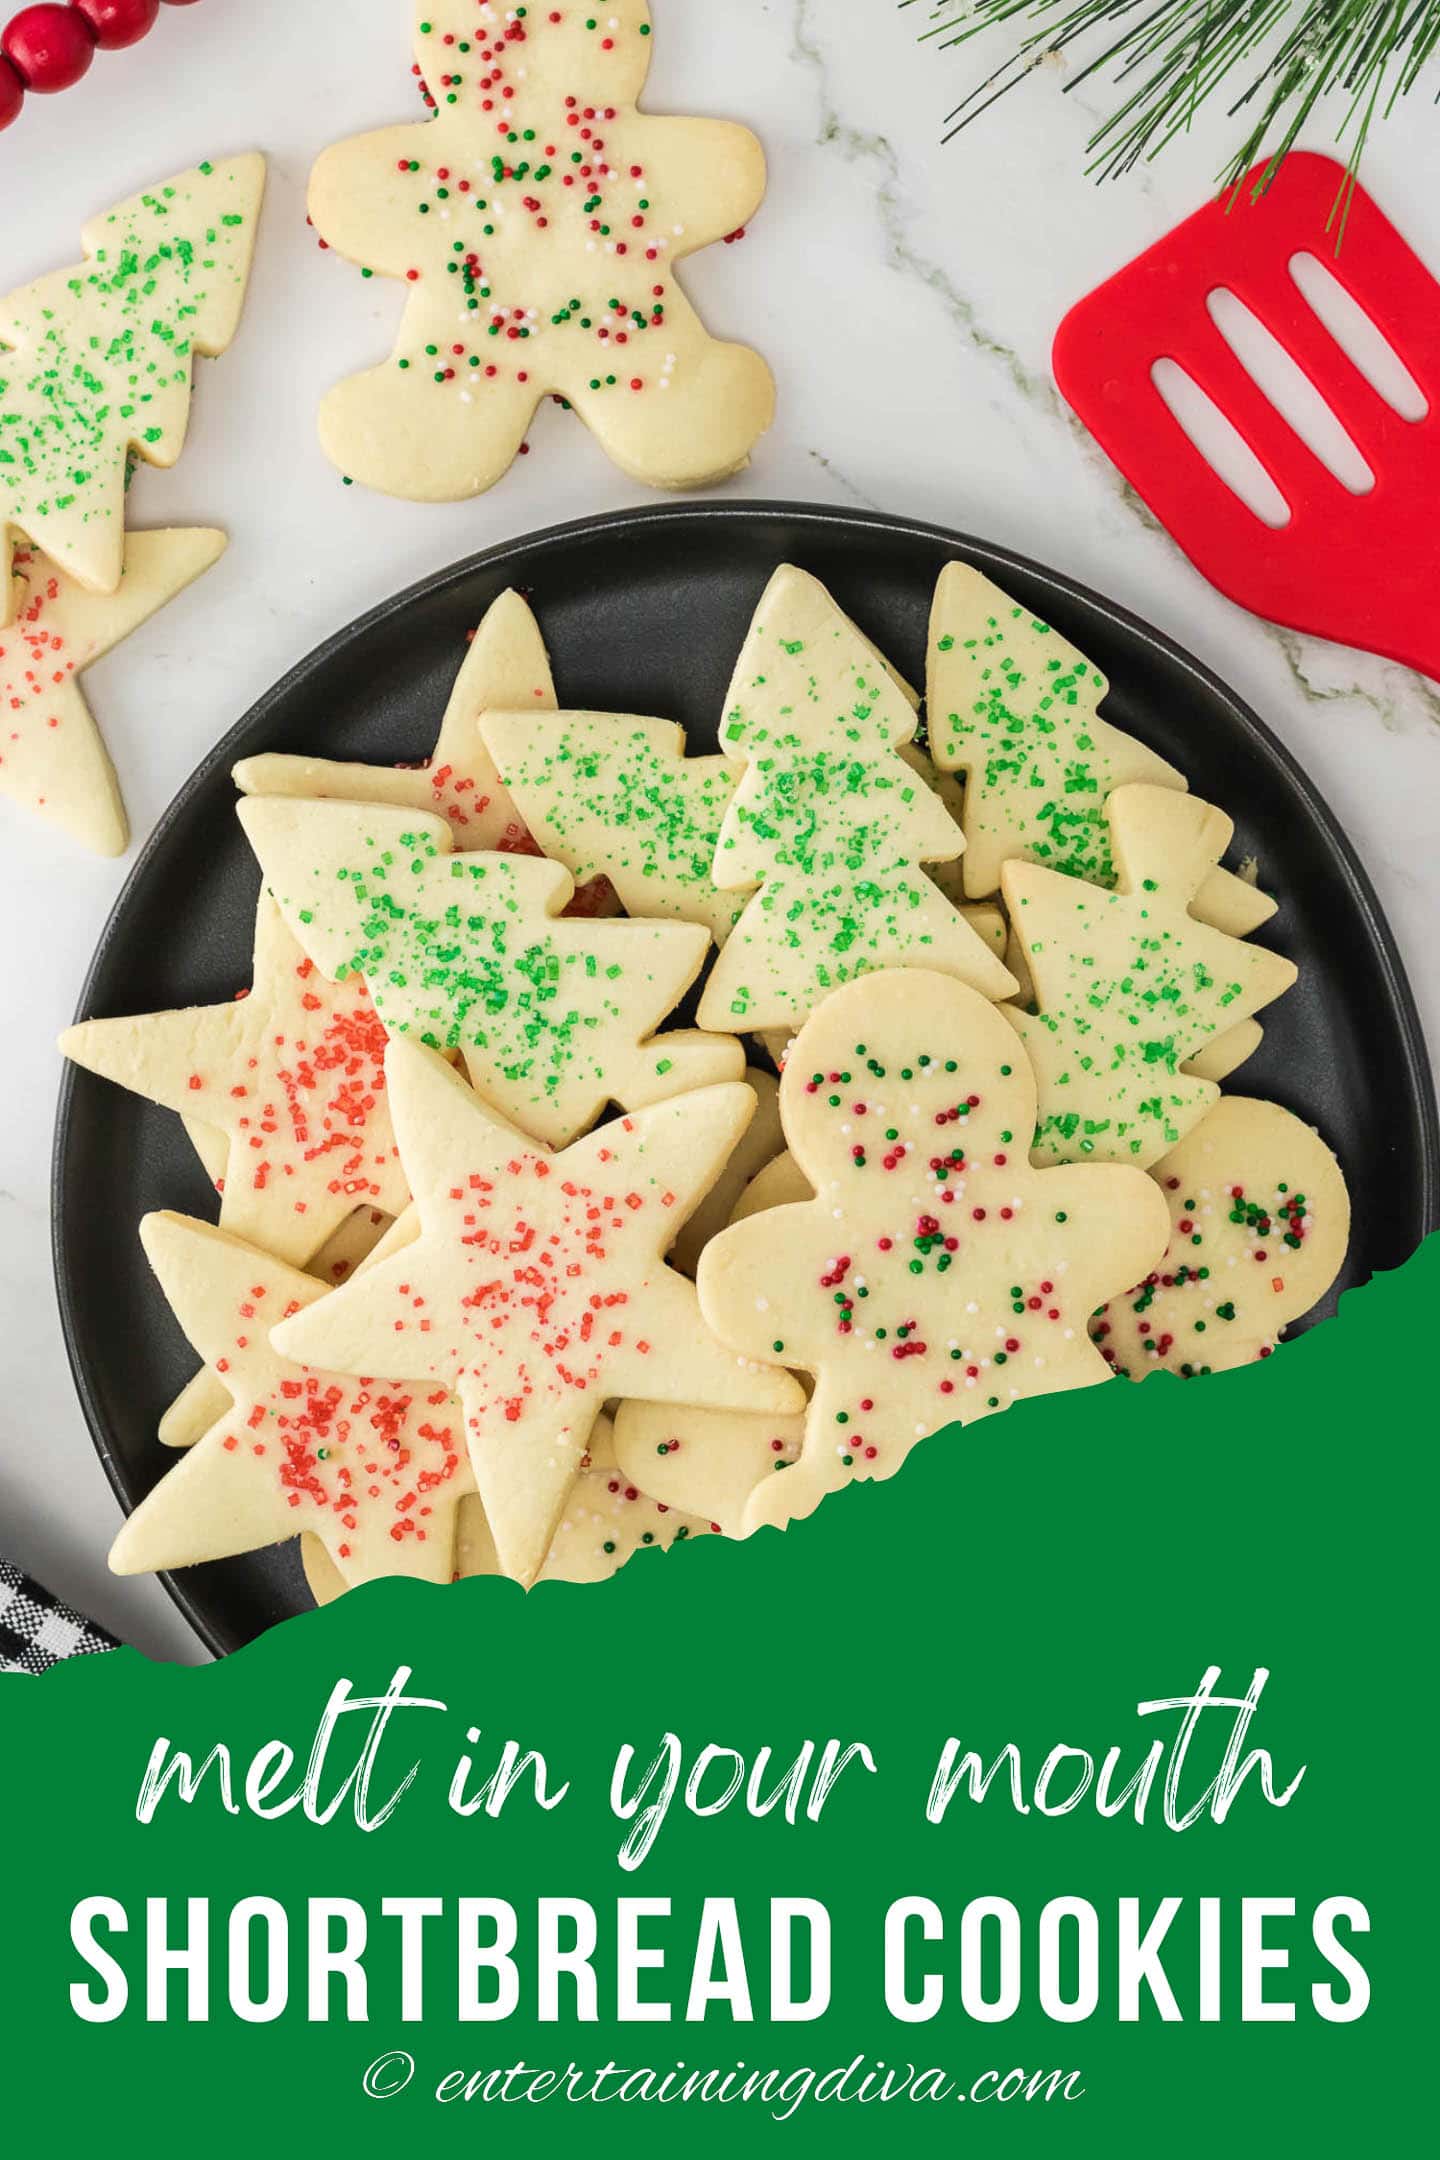 Overhead picture of shortbread Christmas cookies with the text "melt in your mouth shortbread cookies" on the bottom